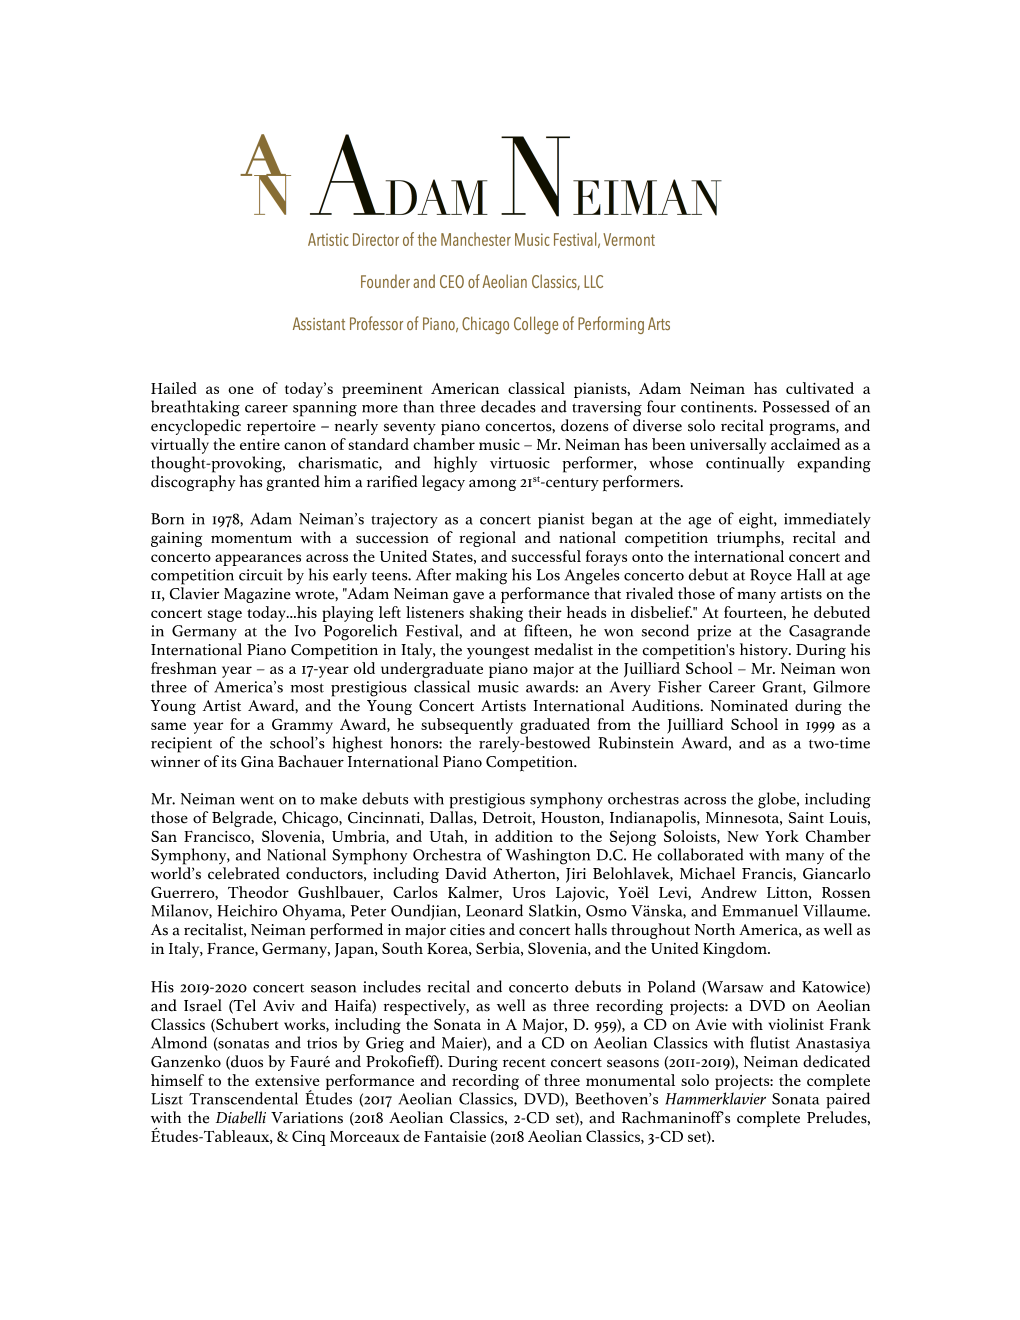 Hailed As One of Today's Preeminent American Classical Pianists, Adam Neiman Has Cultivated a Breathtaking Career Spanning